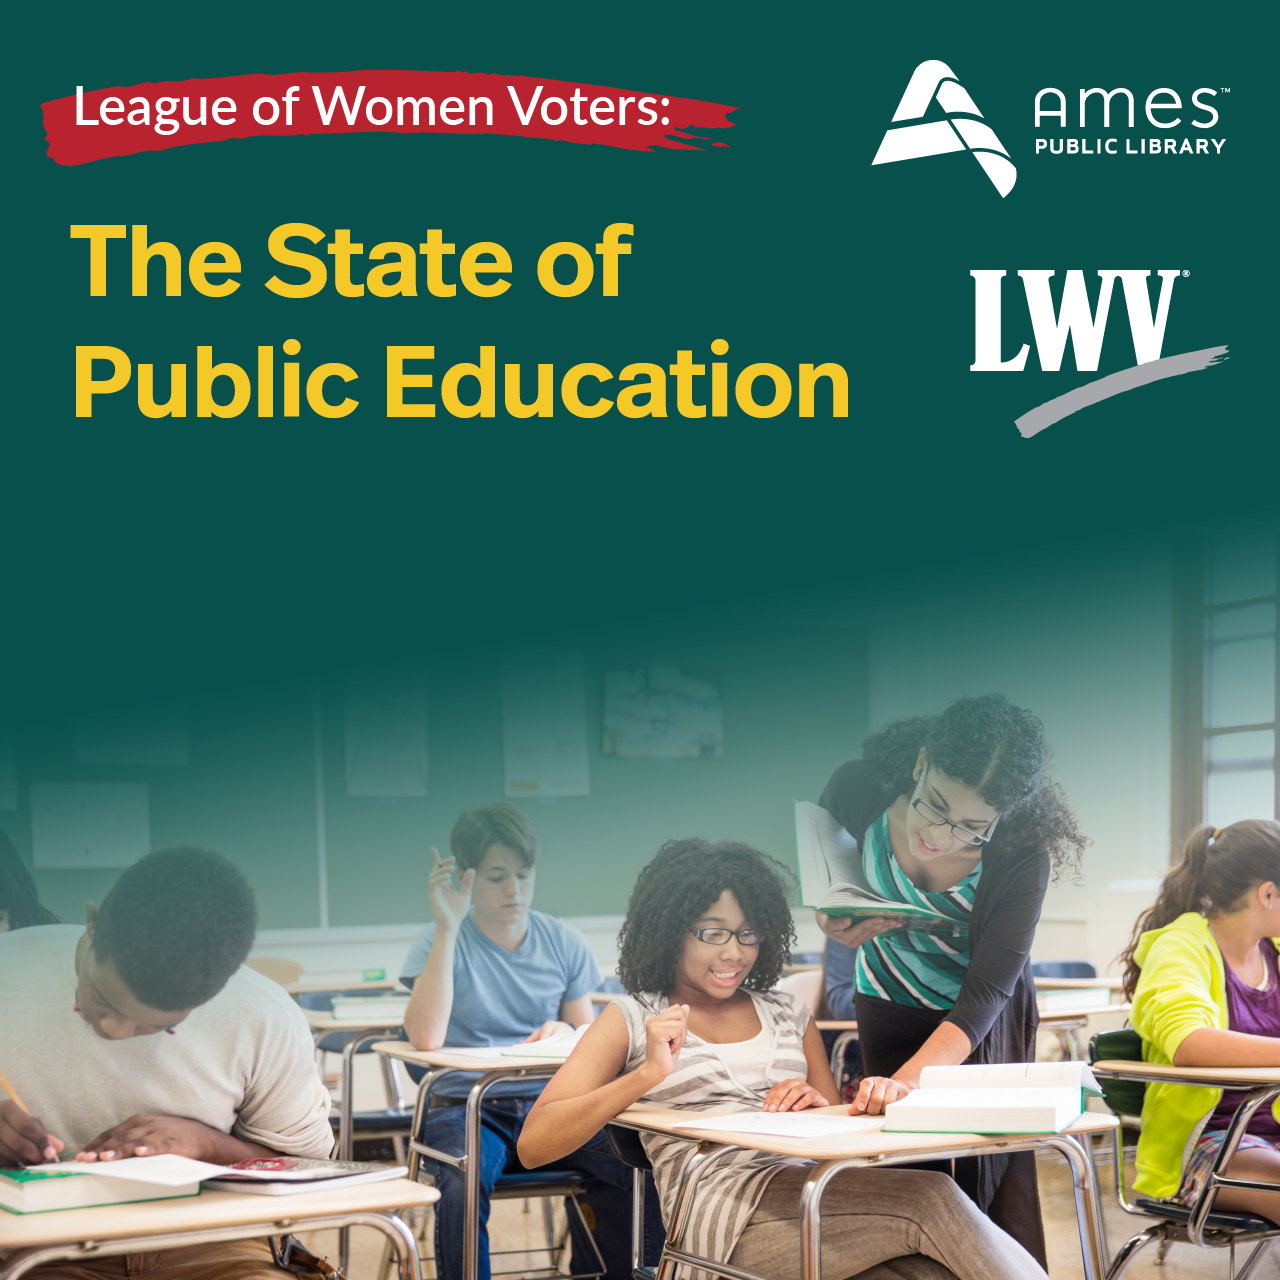 League of Women Voters: The State of Public Education